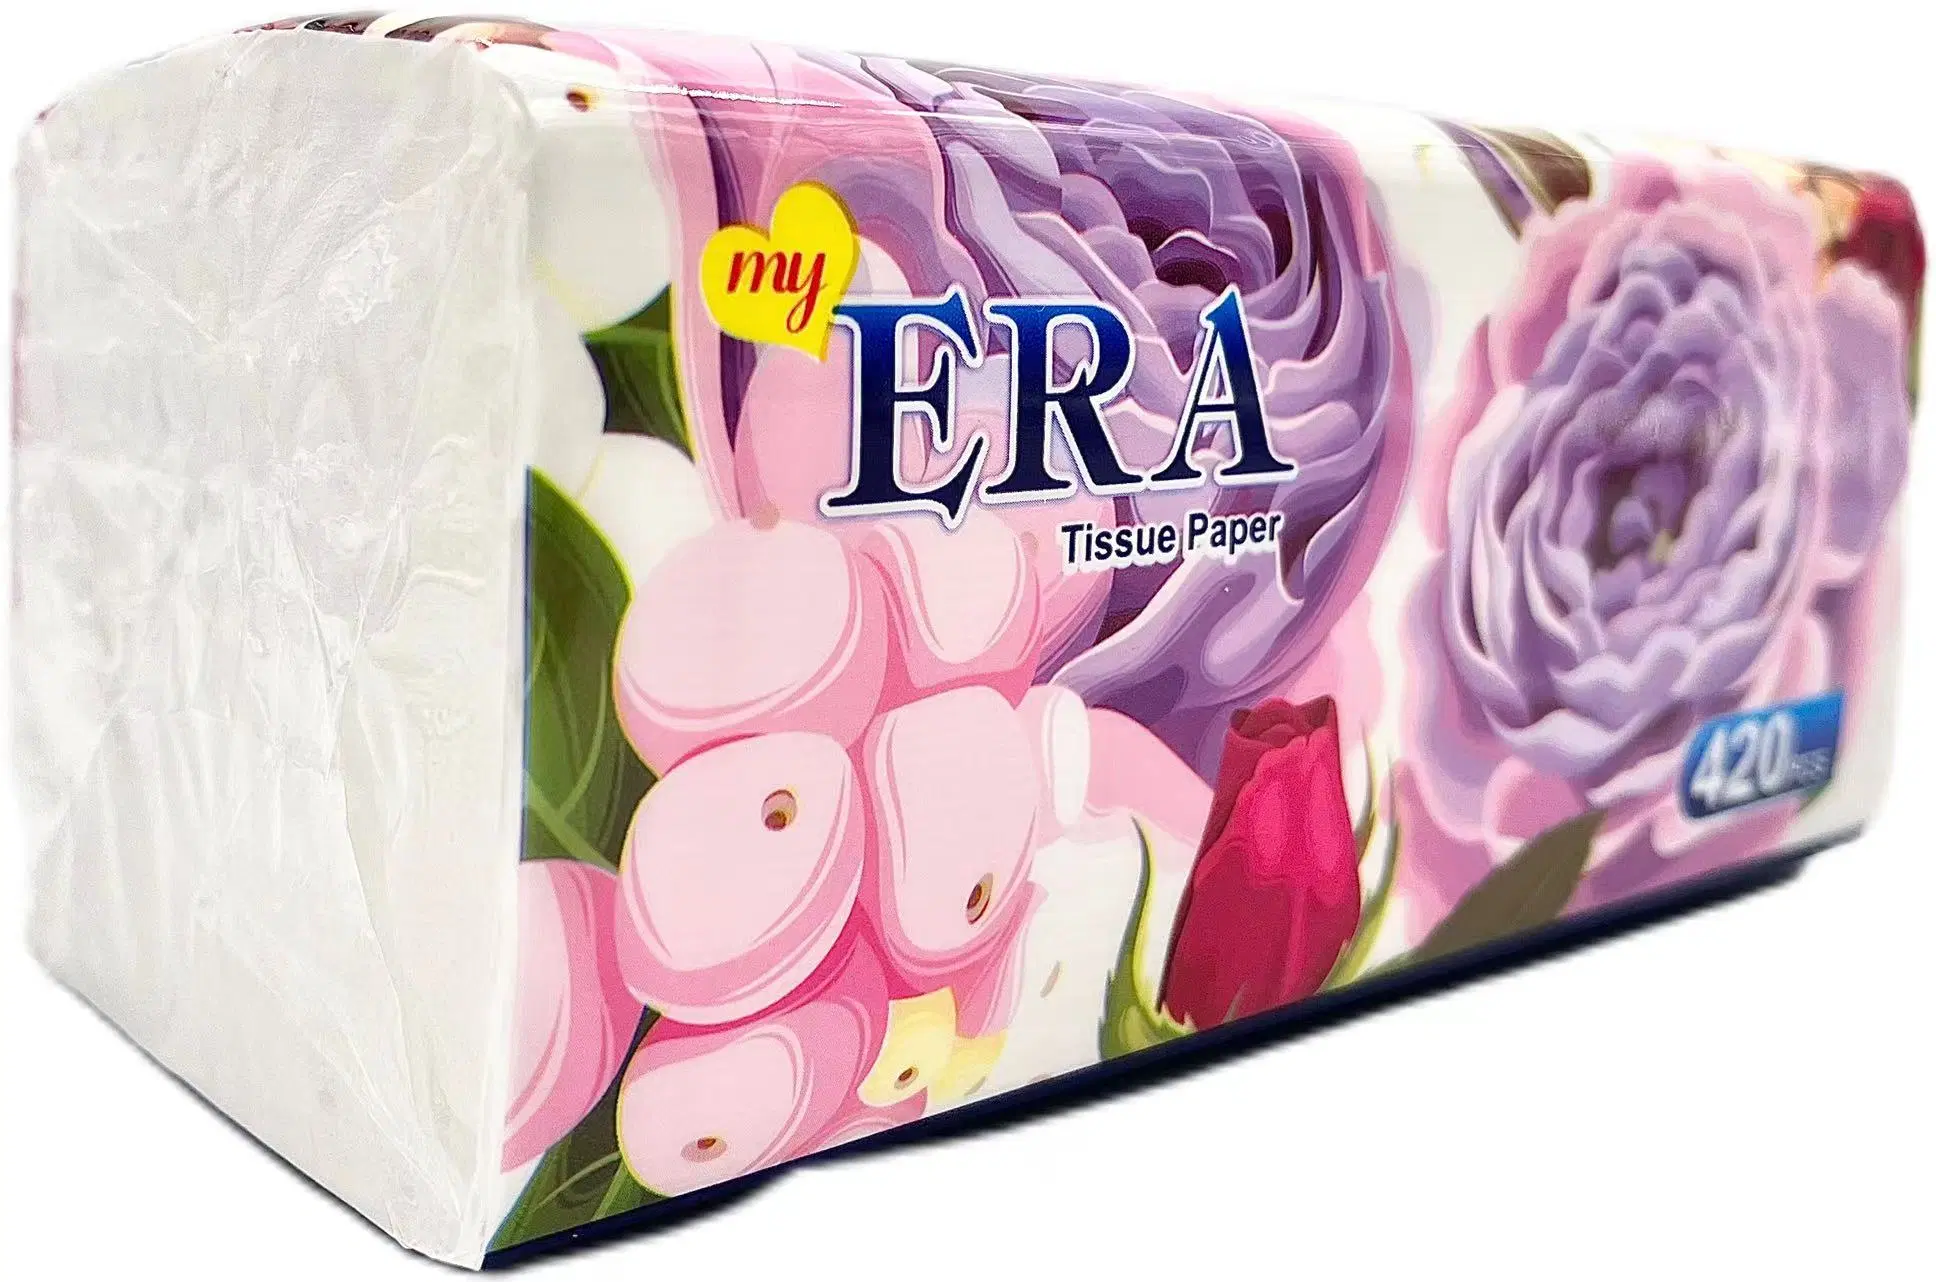 Customize Pocket Tissue Mini Facial Tissue in Advertising Paper with Wholesale/Supplier Price